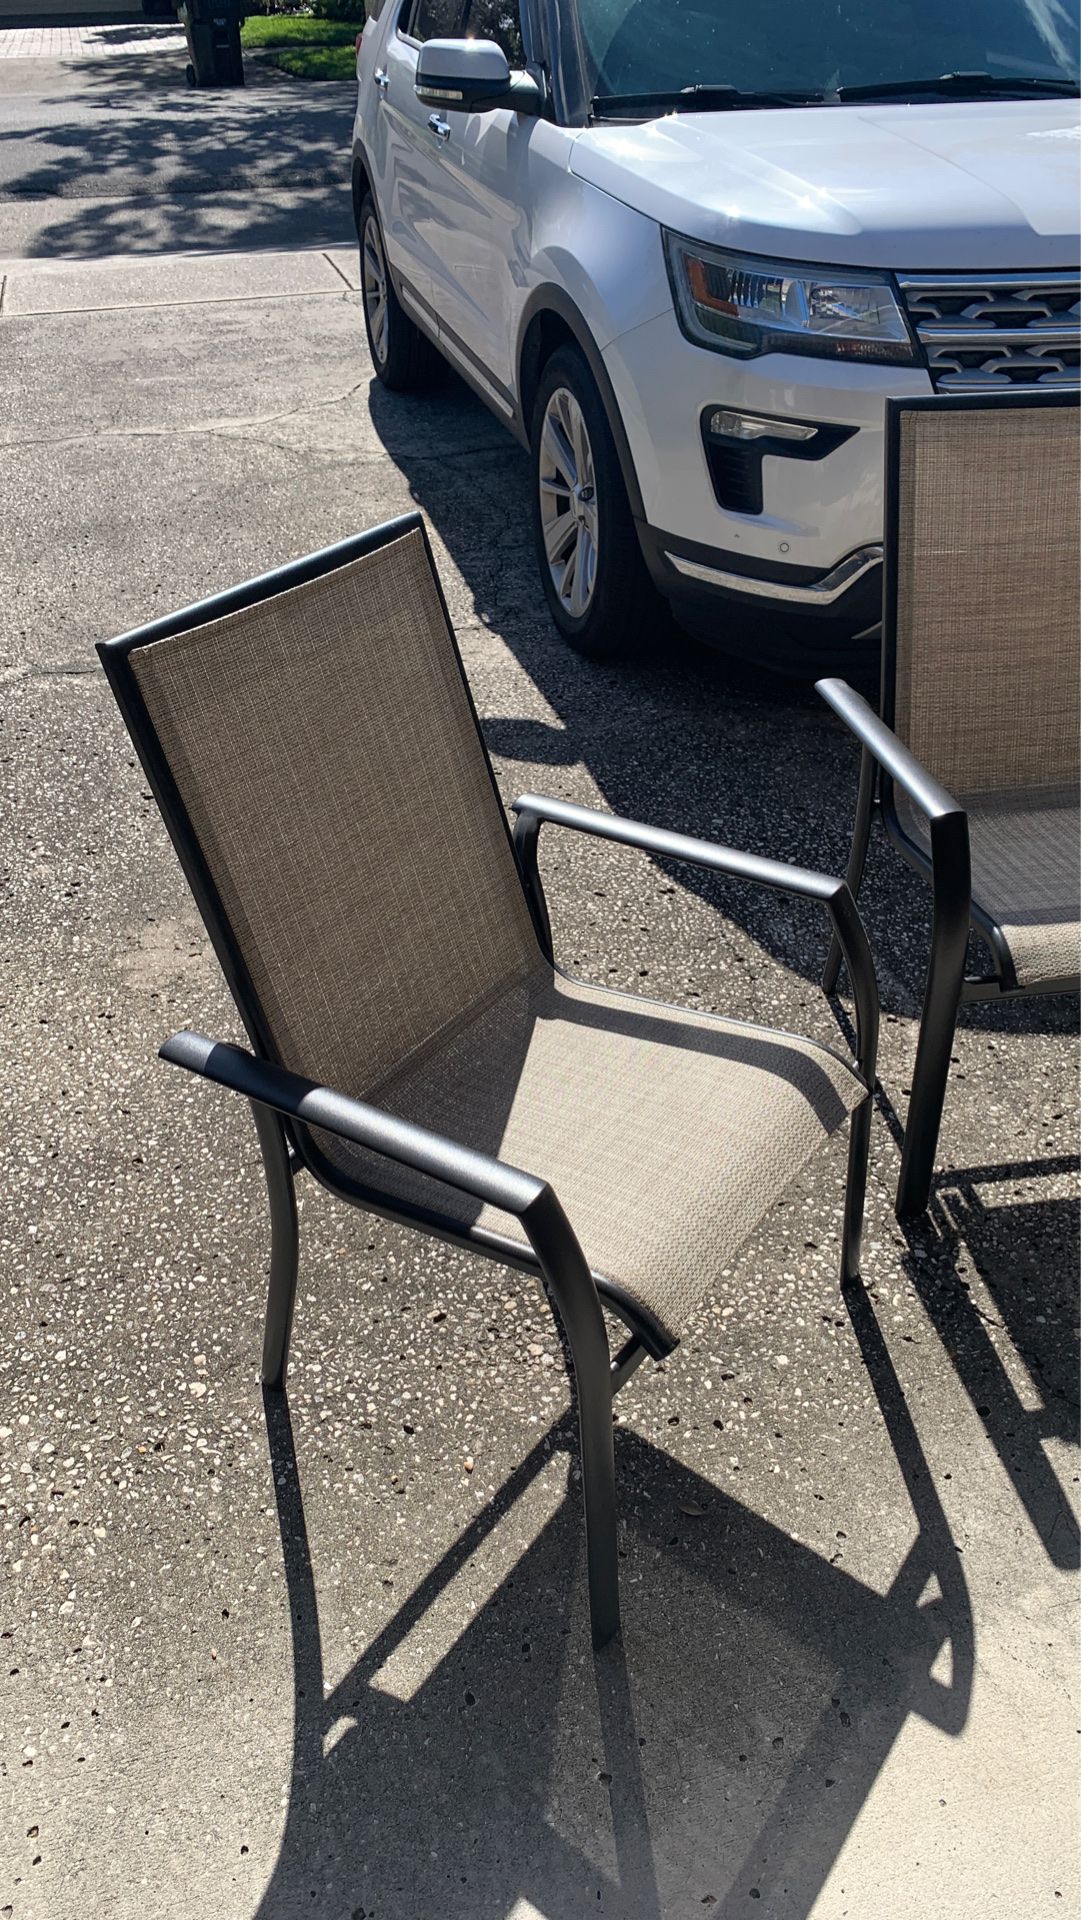 3 brand new chairs. Outdoor.